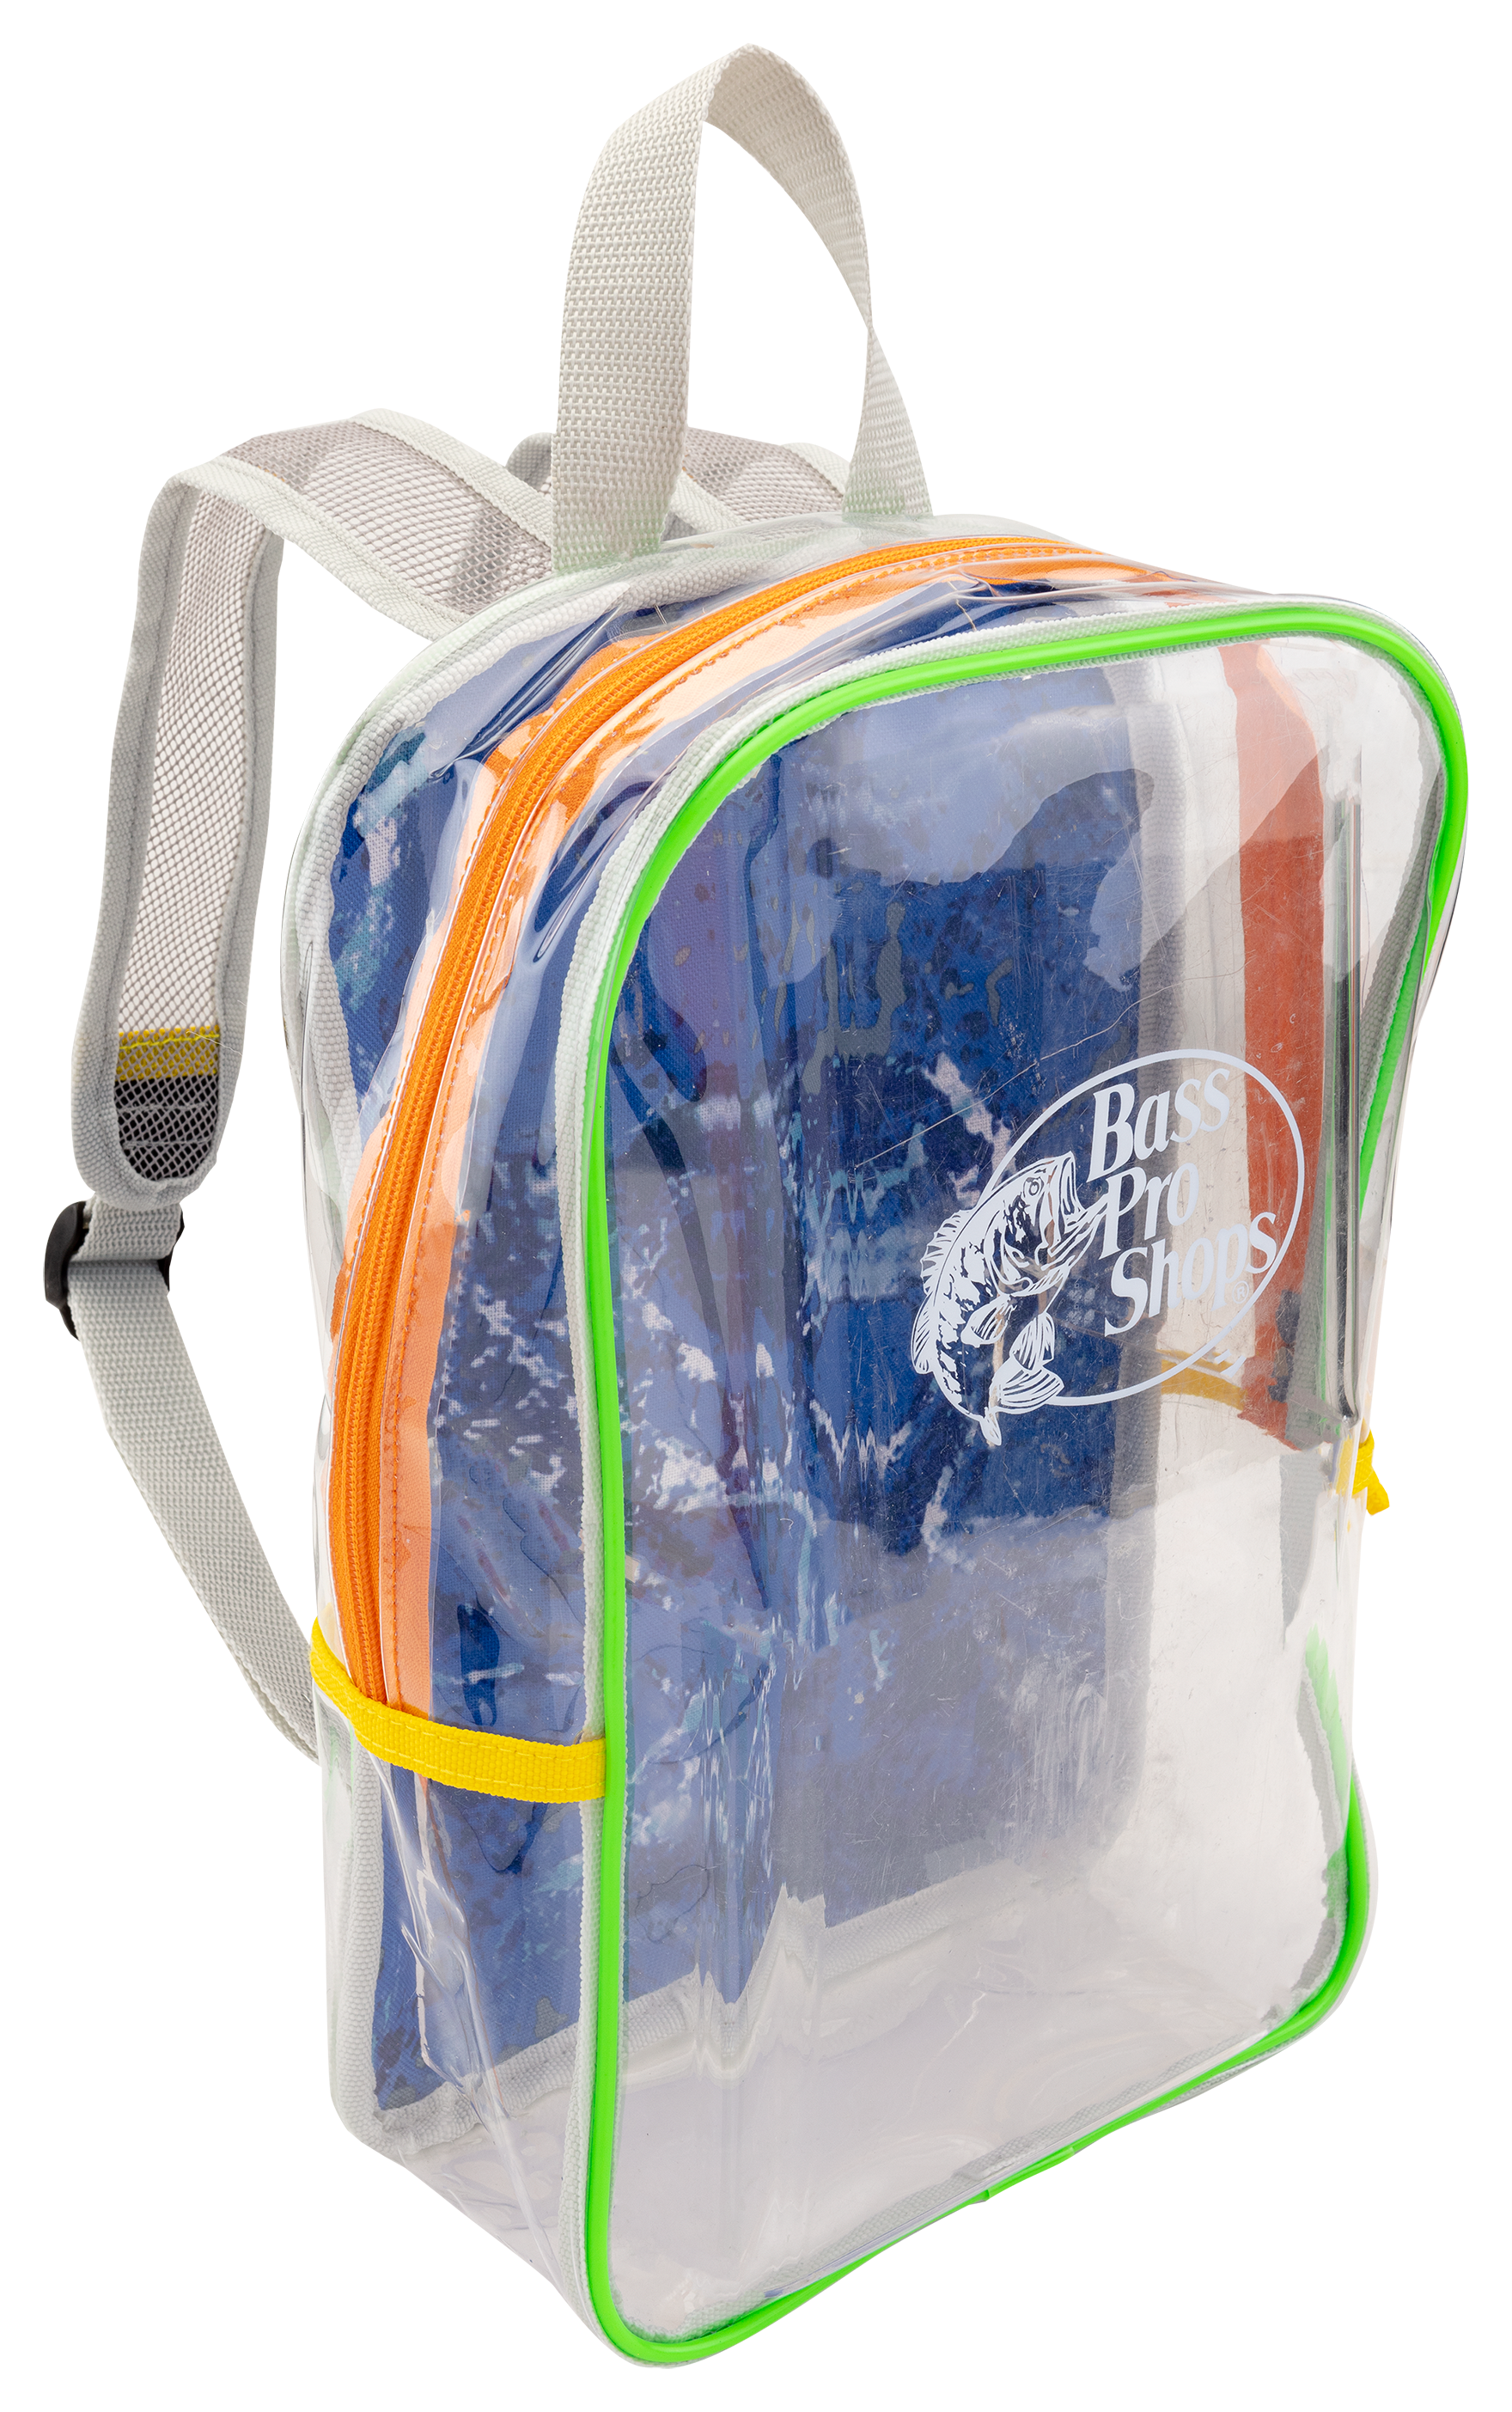 Bass Pro Shops Tackle Backpack 3600 for Kids - Clear